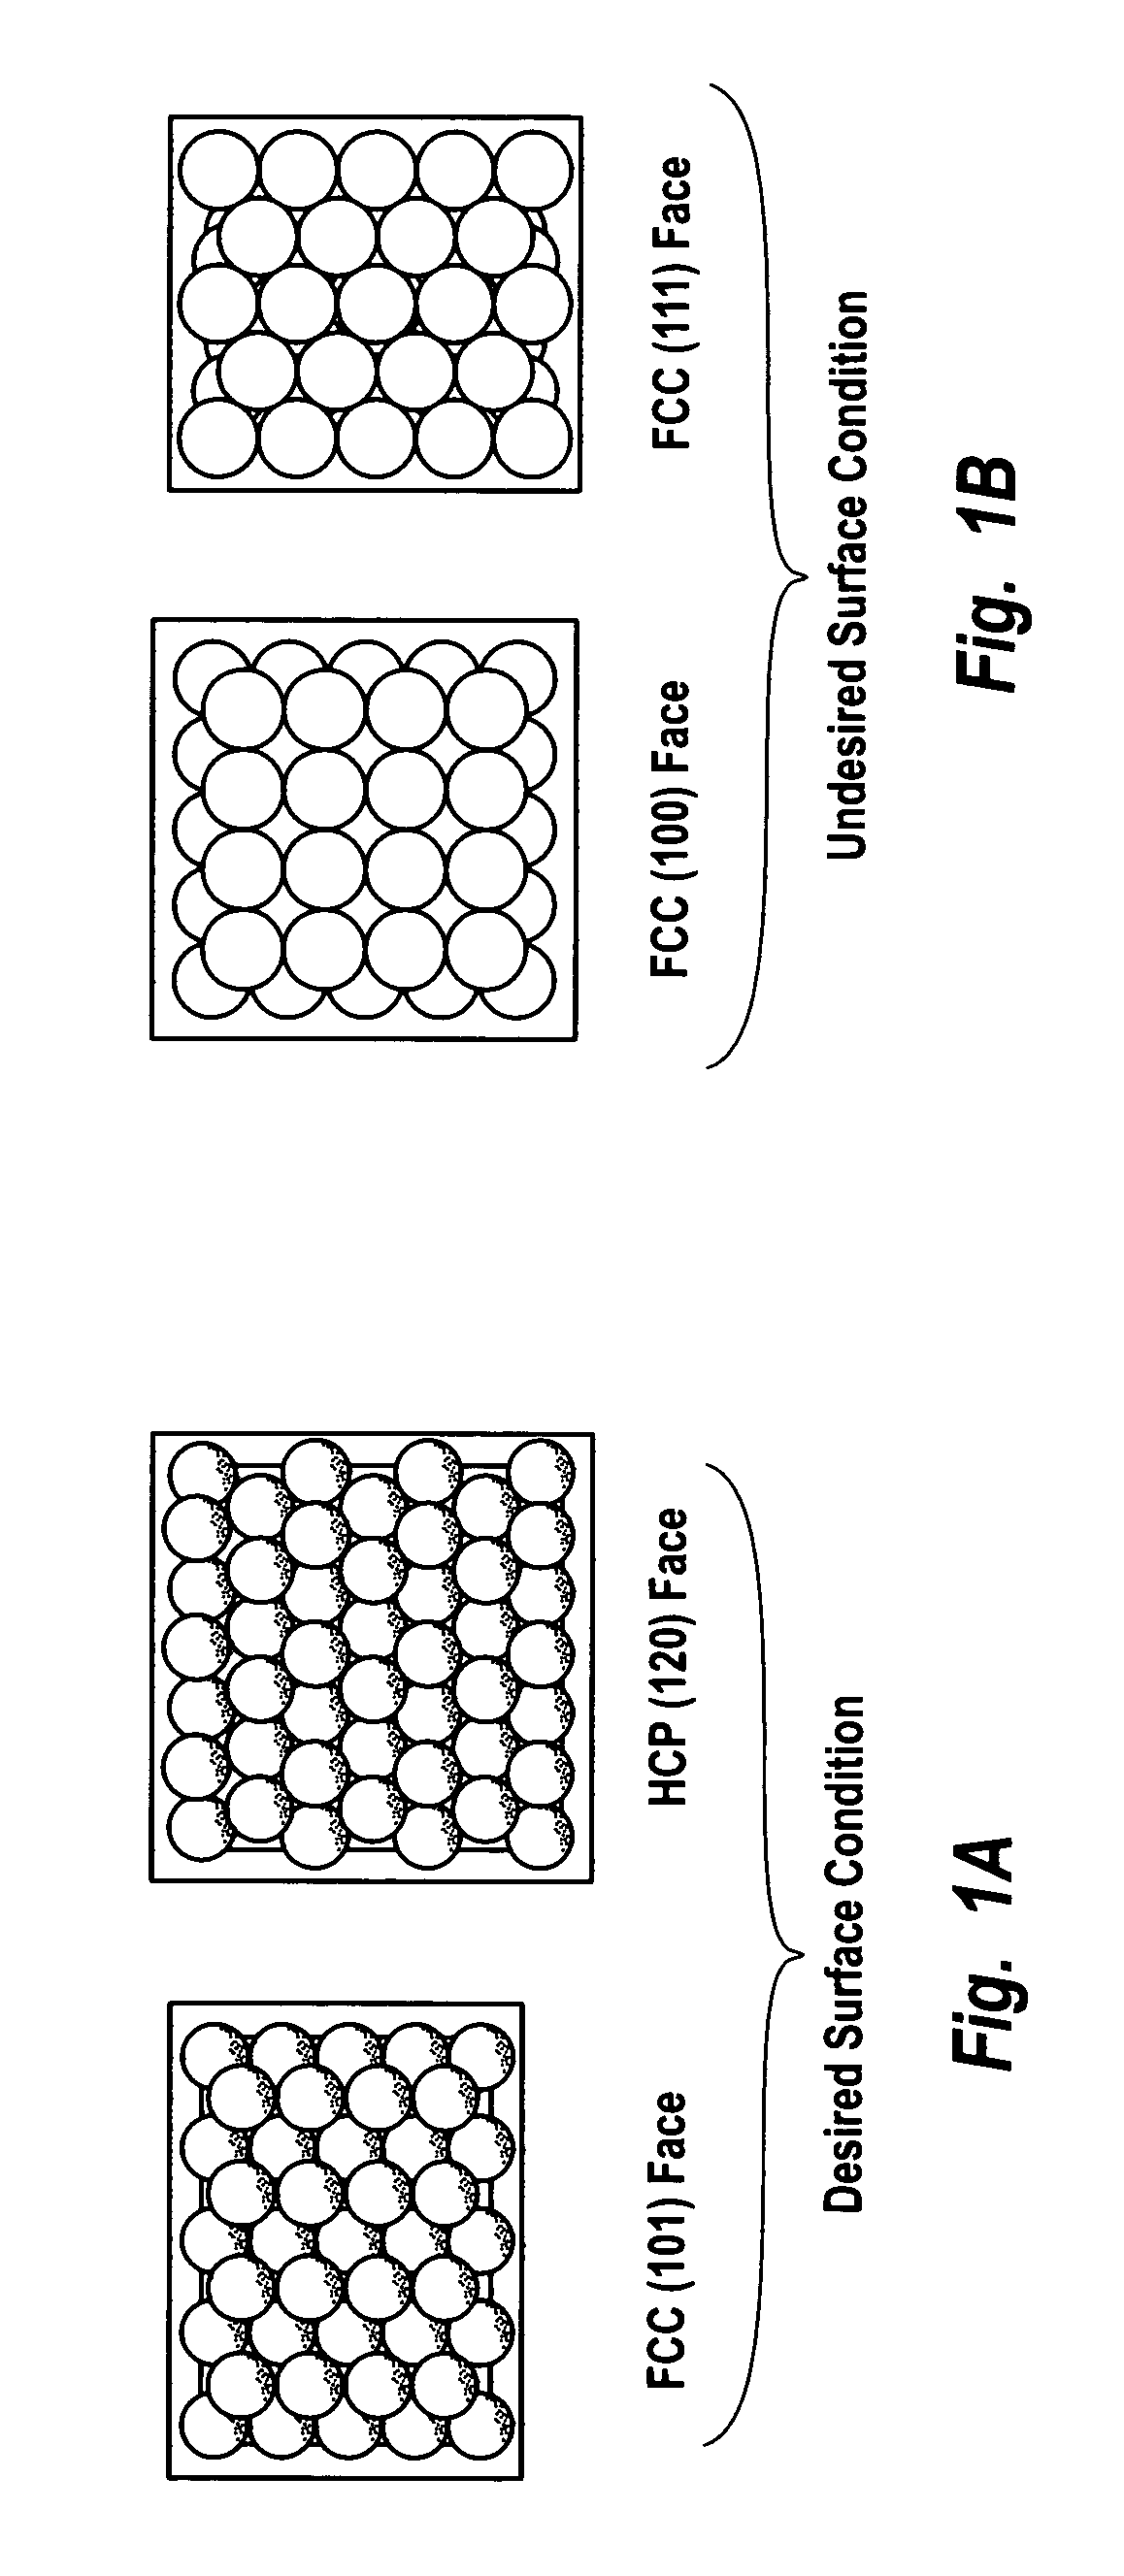 Supported catalysts having a controlled coordination structure and methods for preparing such catalysts